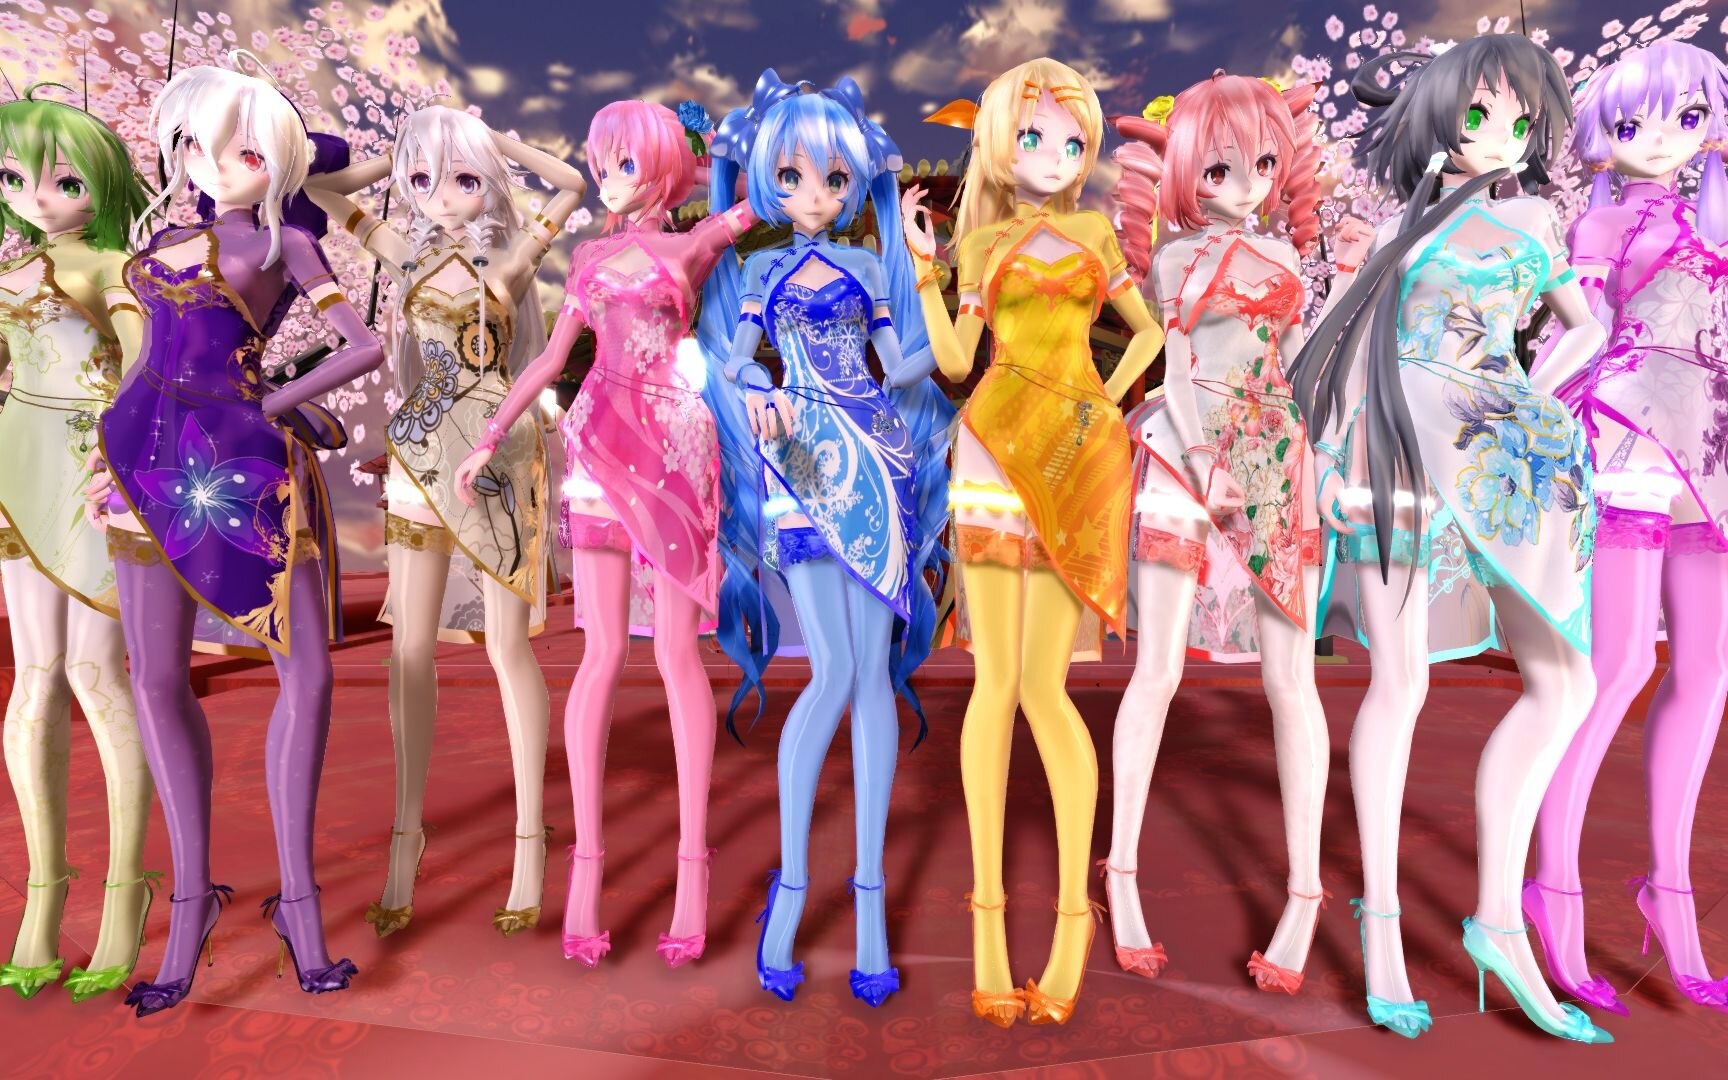 Steam Atolyesi Mmd舞蹈合集 Mmd Dance Collection